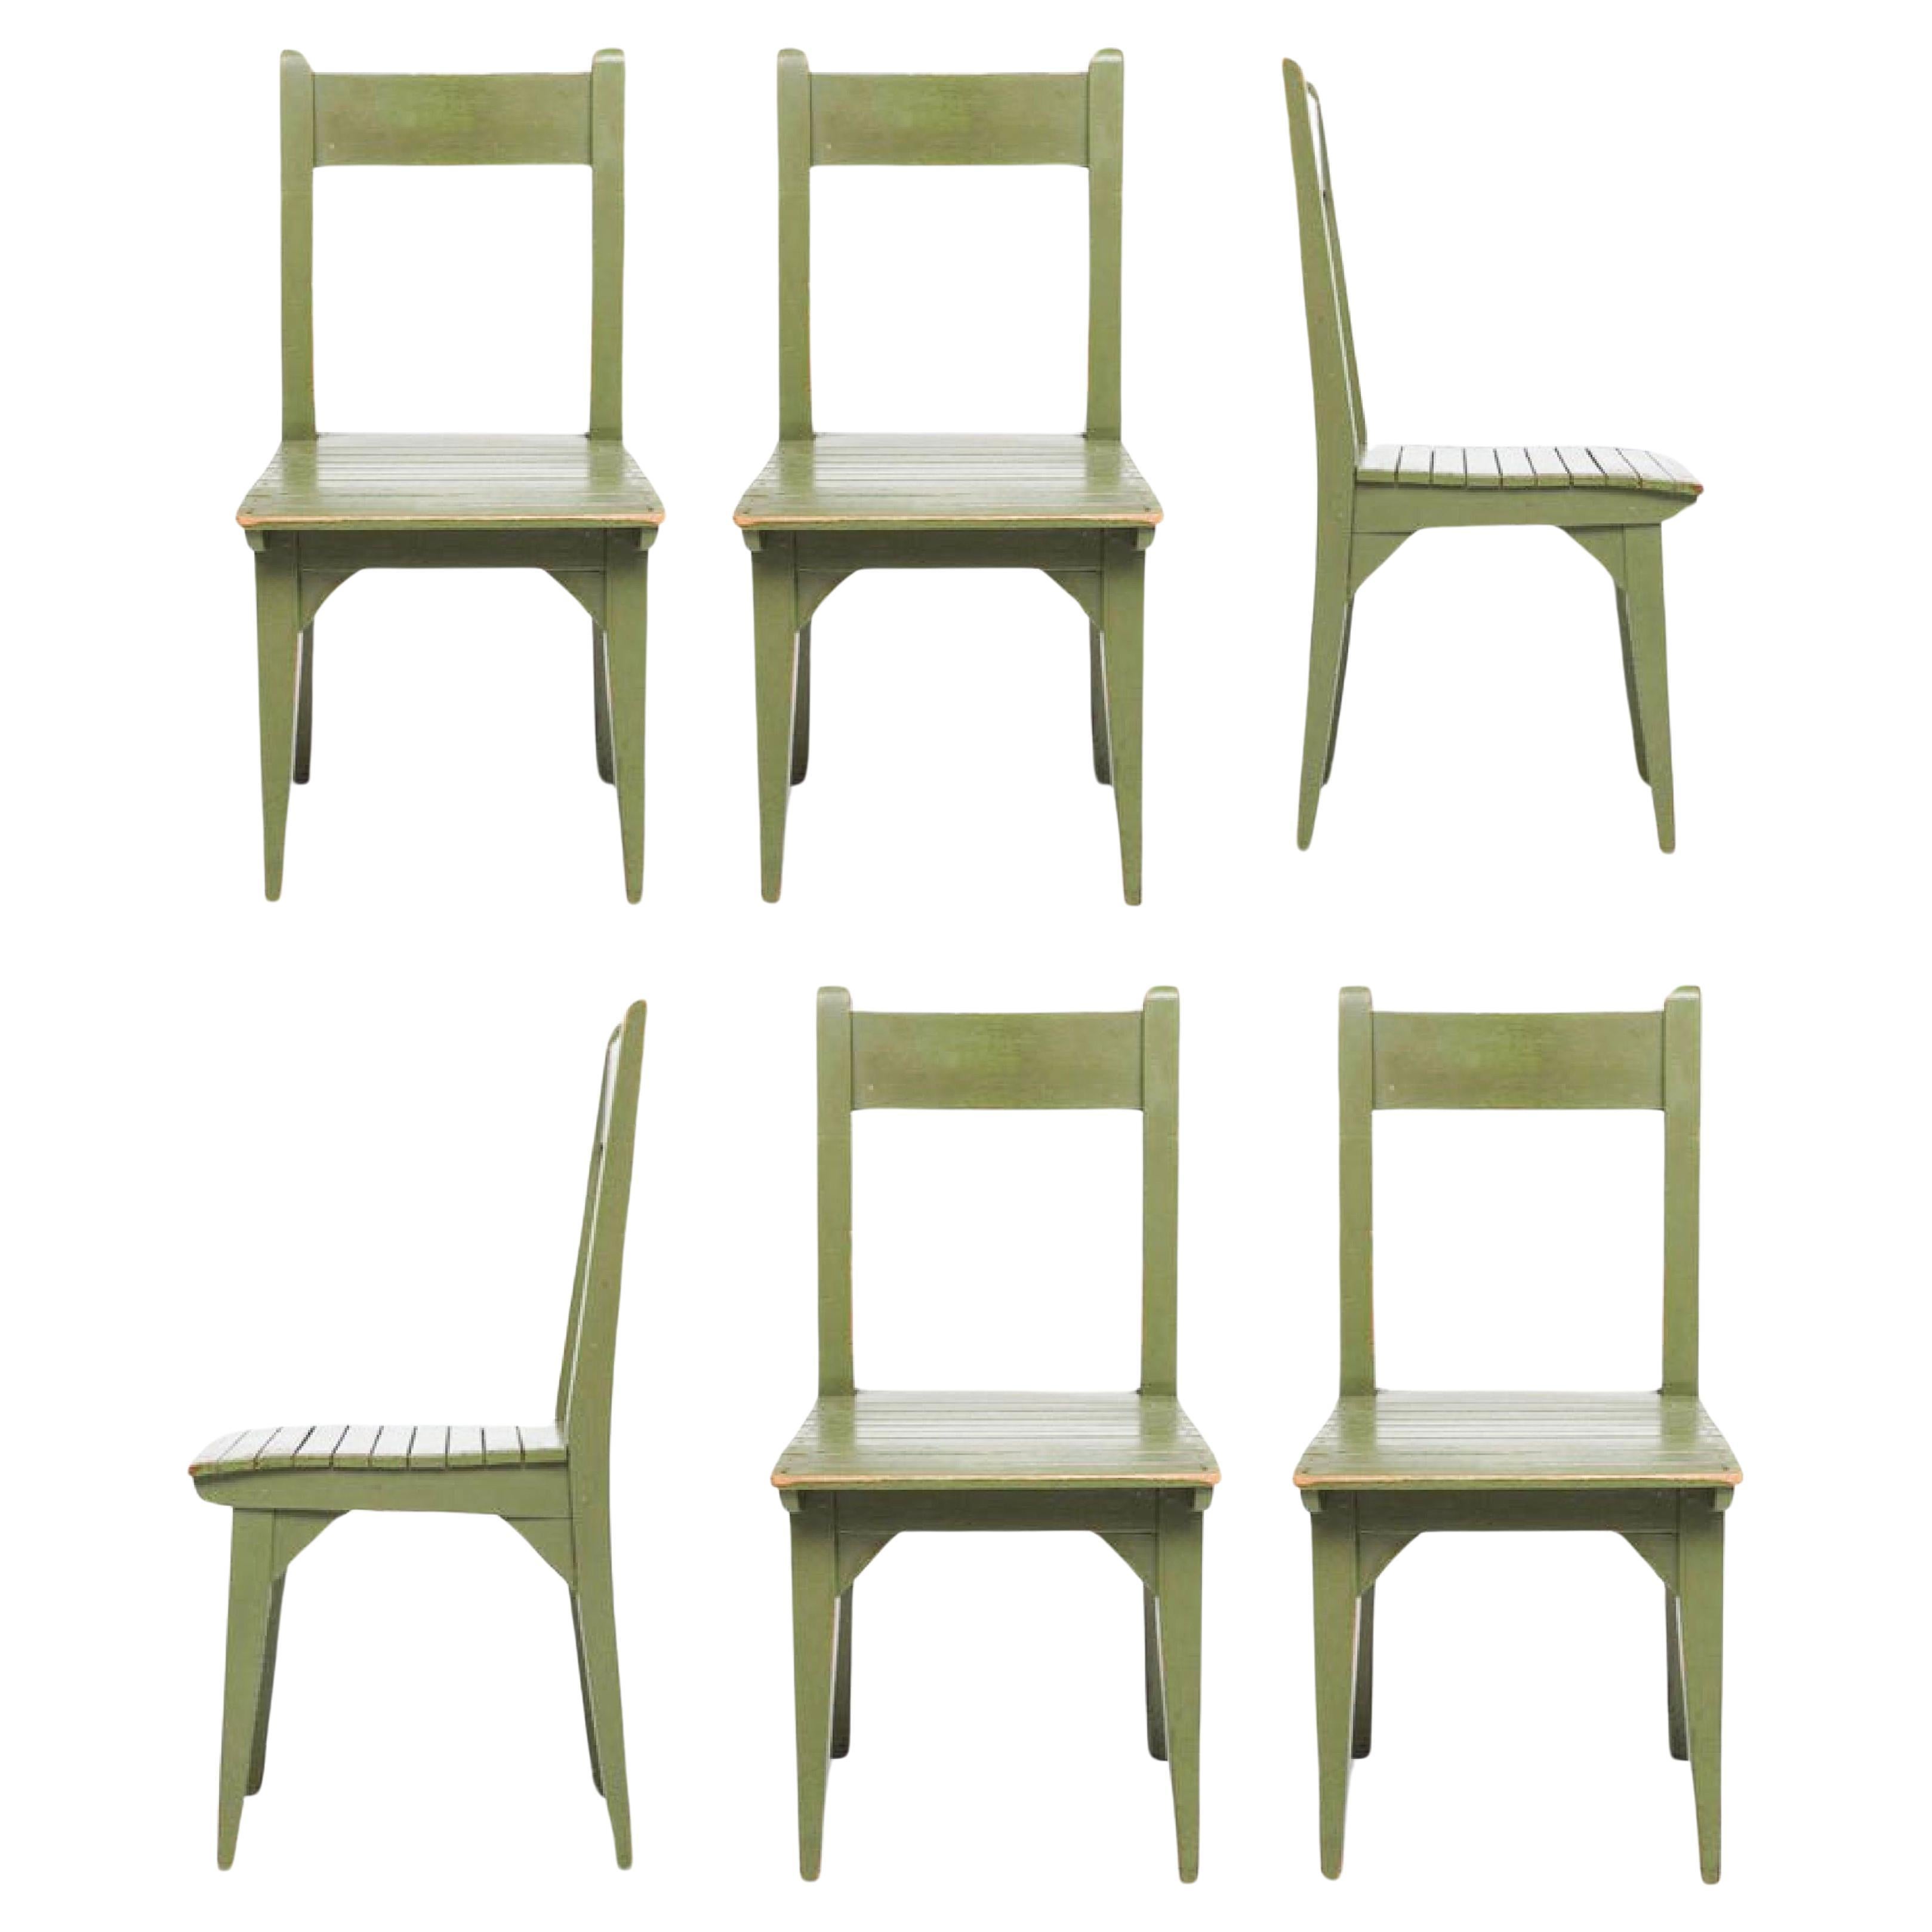 Roy McMakin Painted Wood Postmodern Dining Chair Set of 6, Green, 1982, USA.